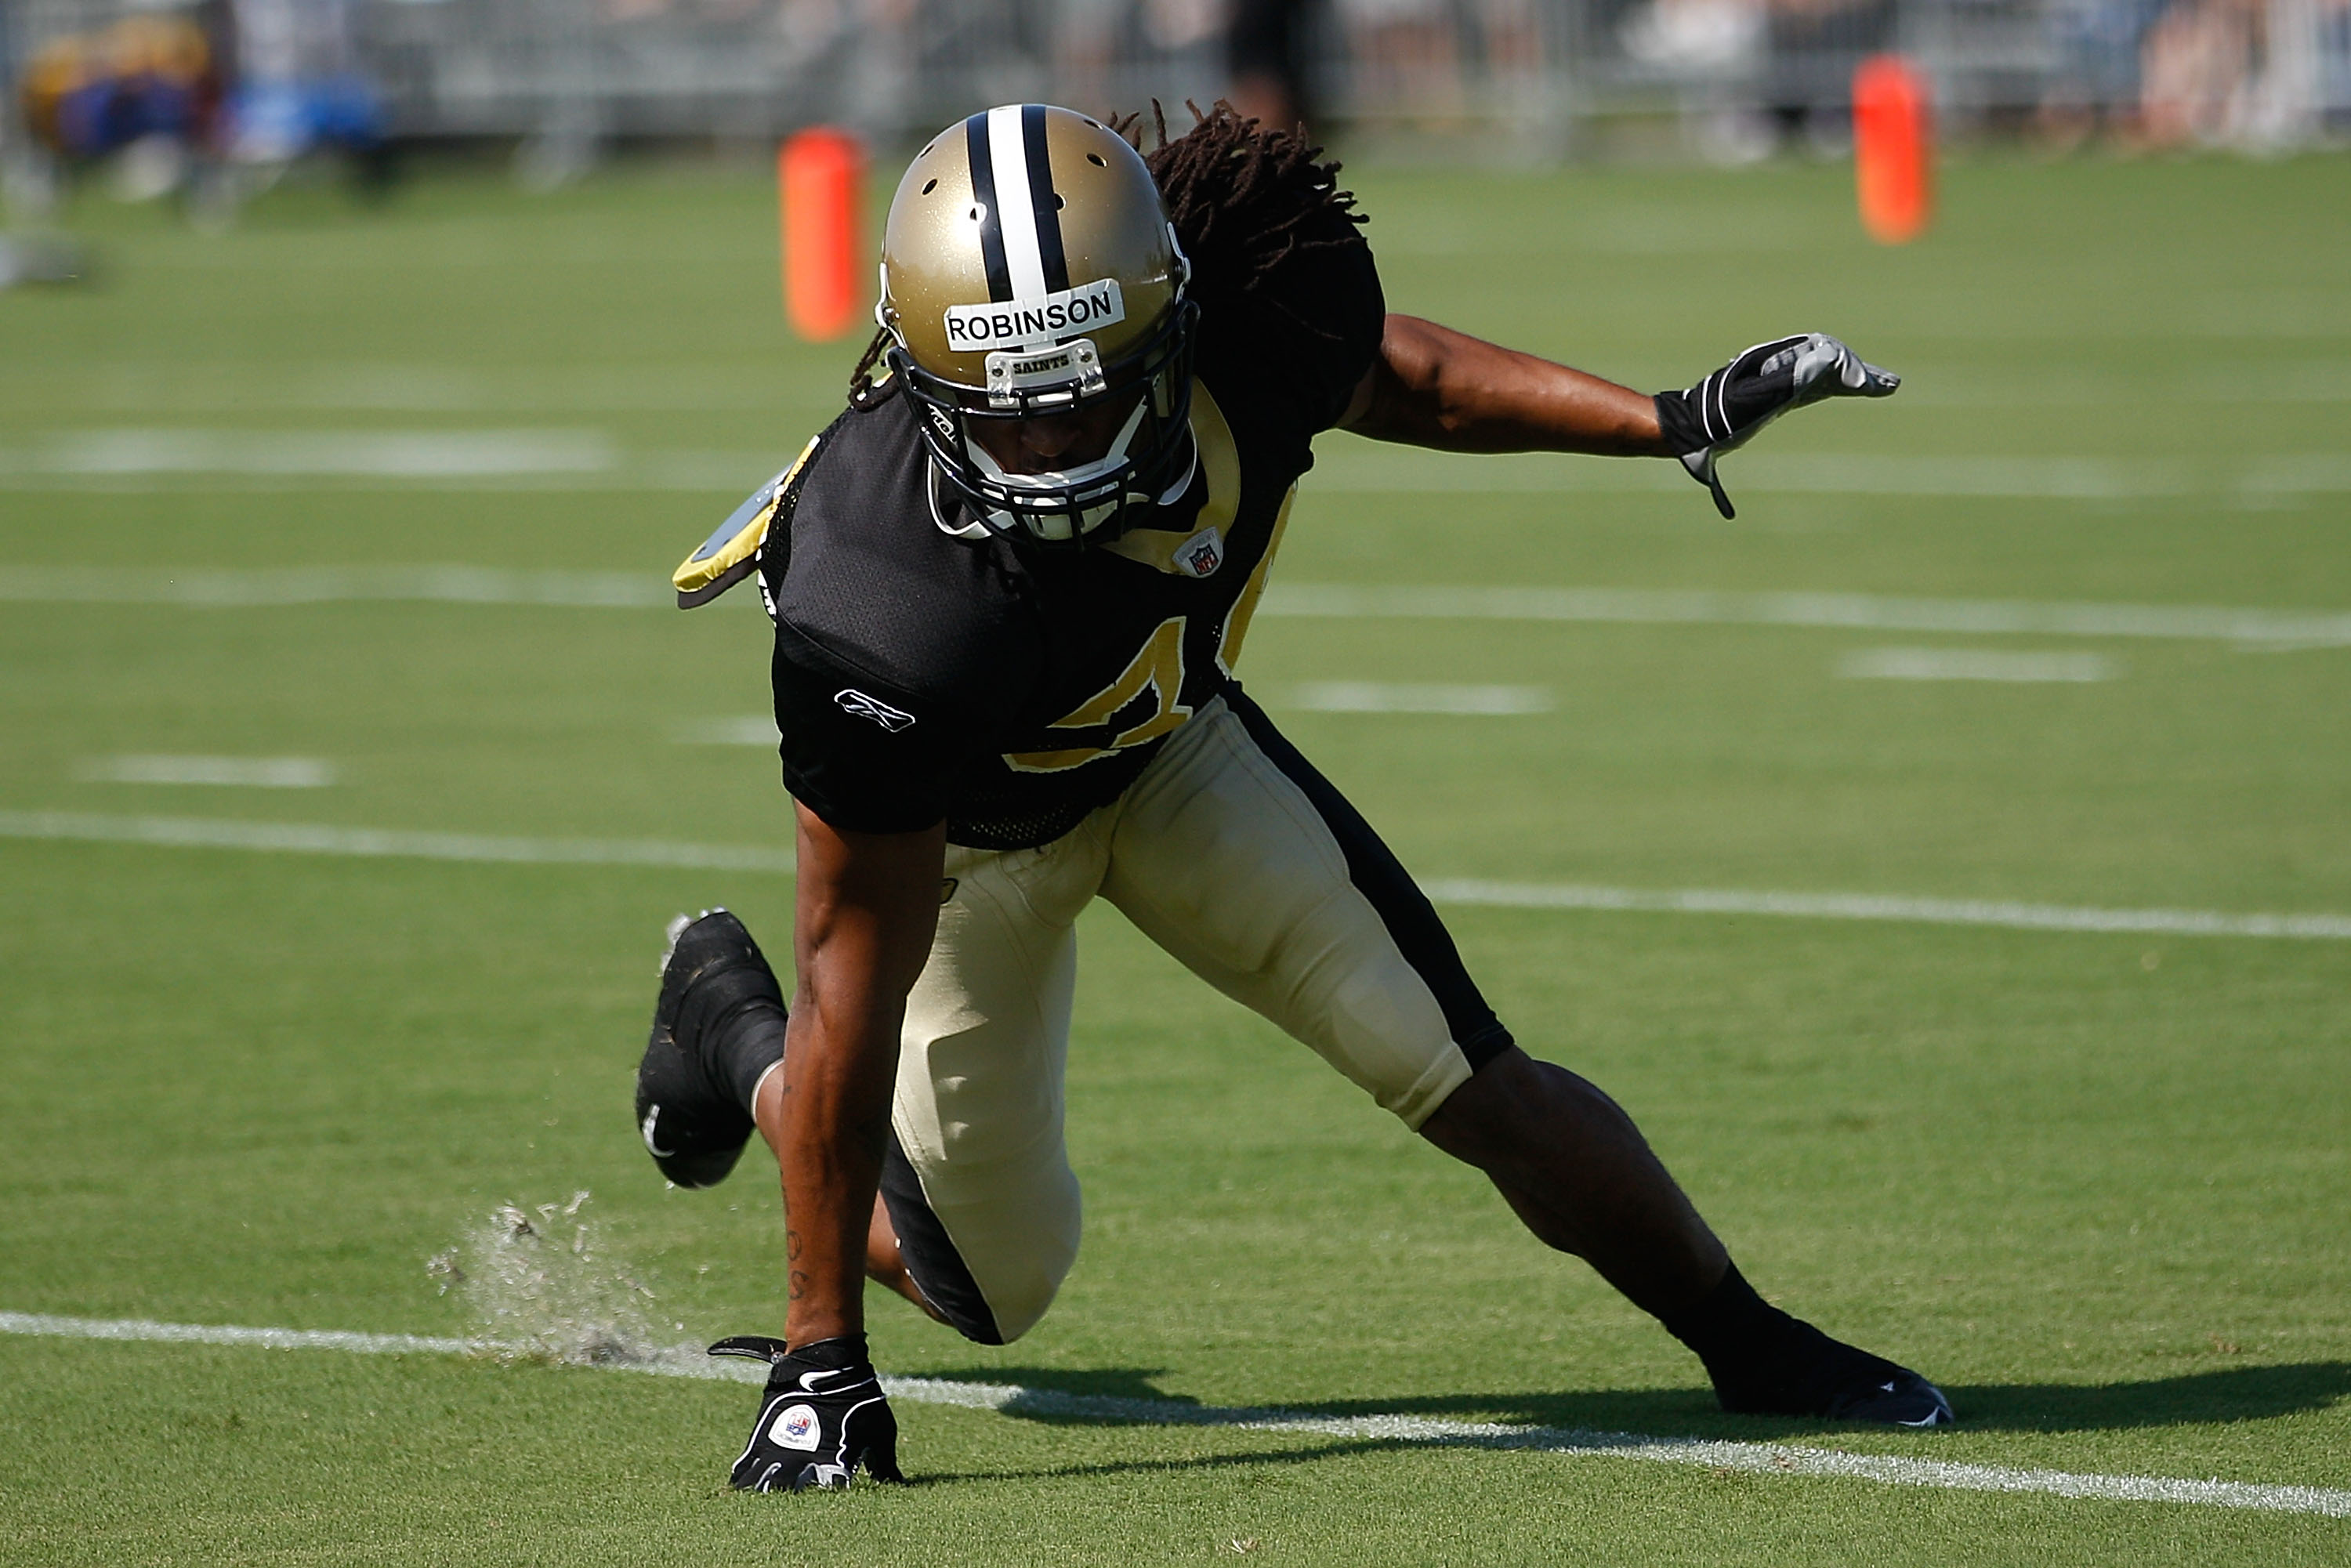 METAIRIE, LA - JULY 30:  Patrick Robinson #34 of the New Orleans Saints during training camp on July 30, 2010 in Metairie, Louisiana.  (Photo by Chris Graythen/Getty Images)